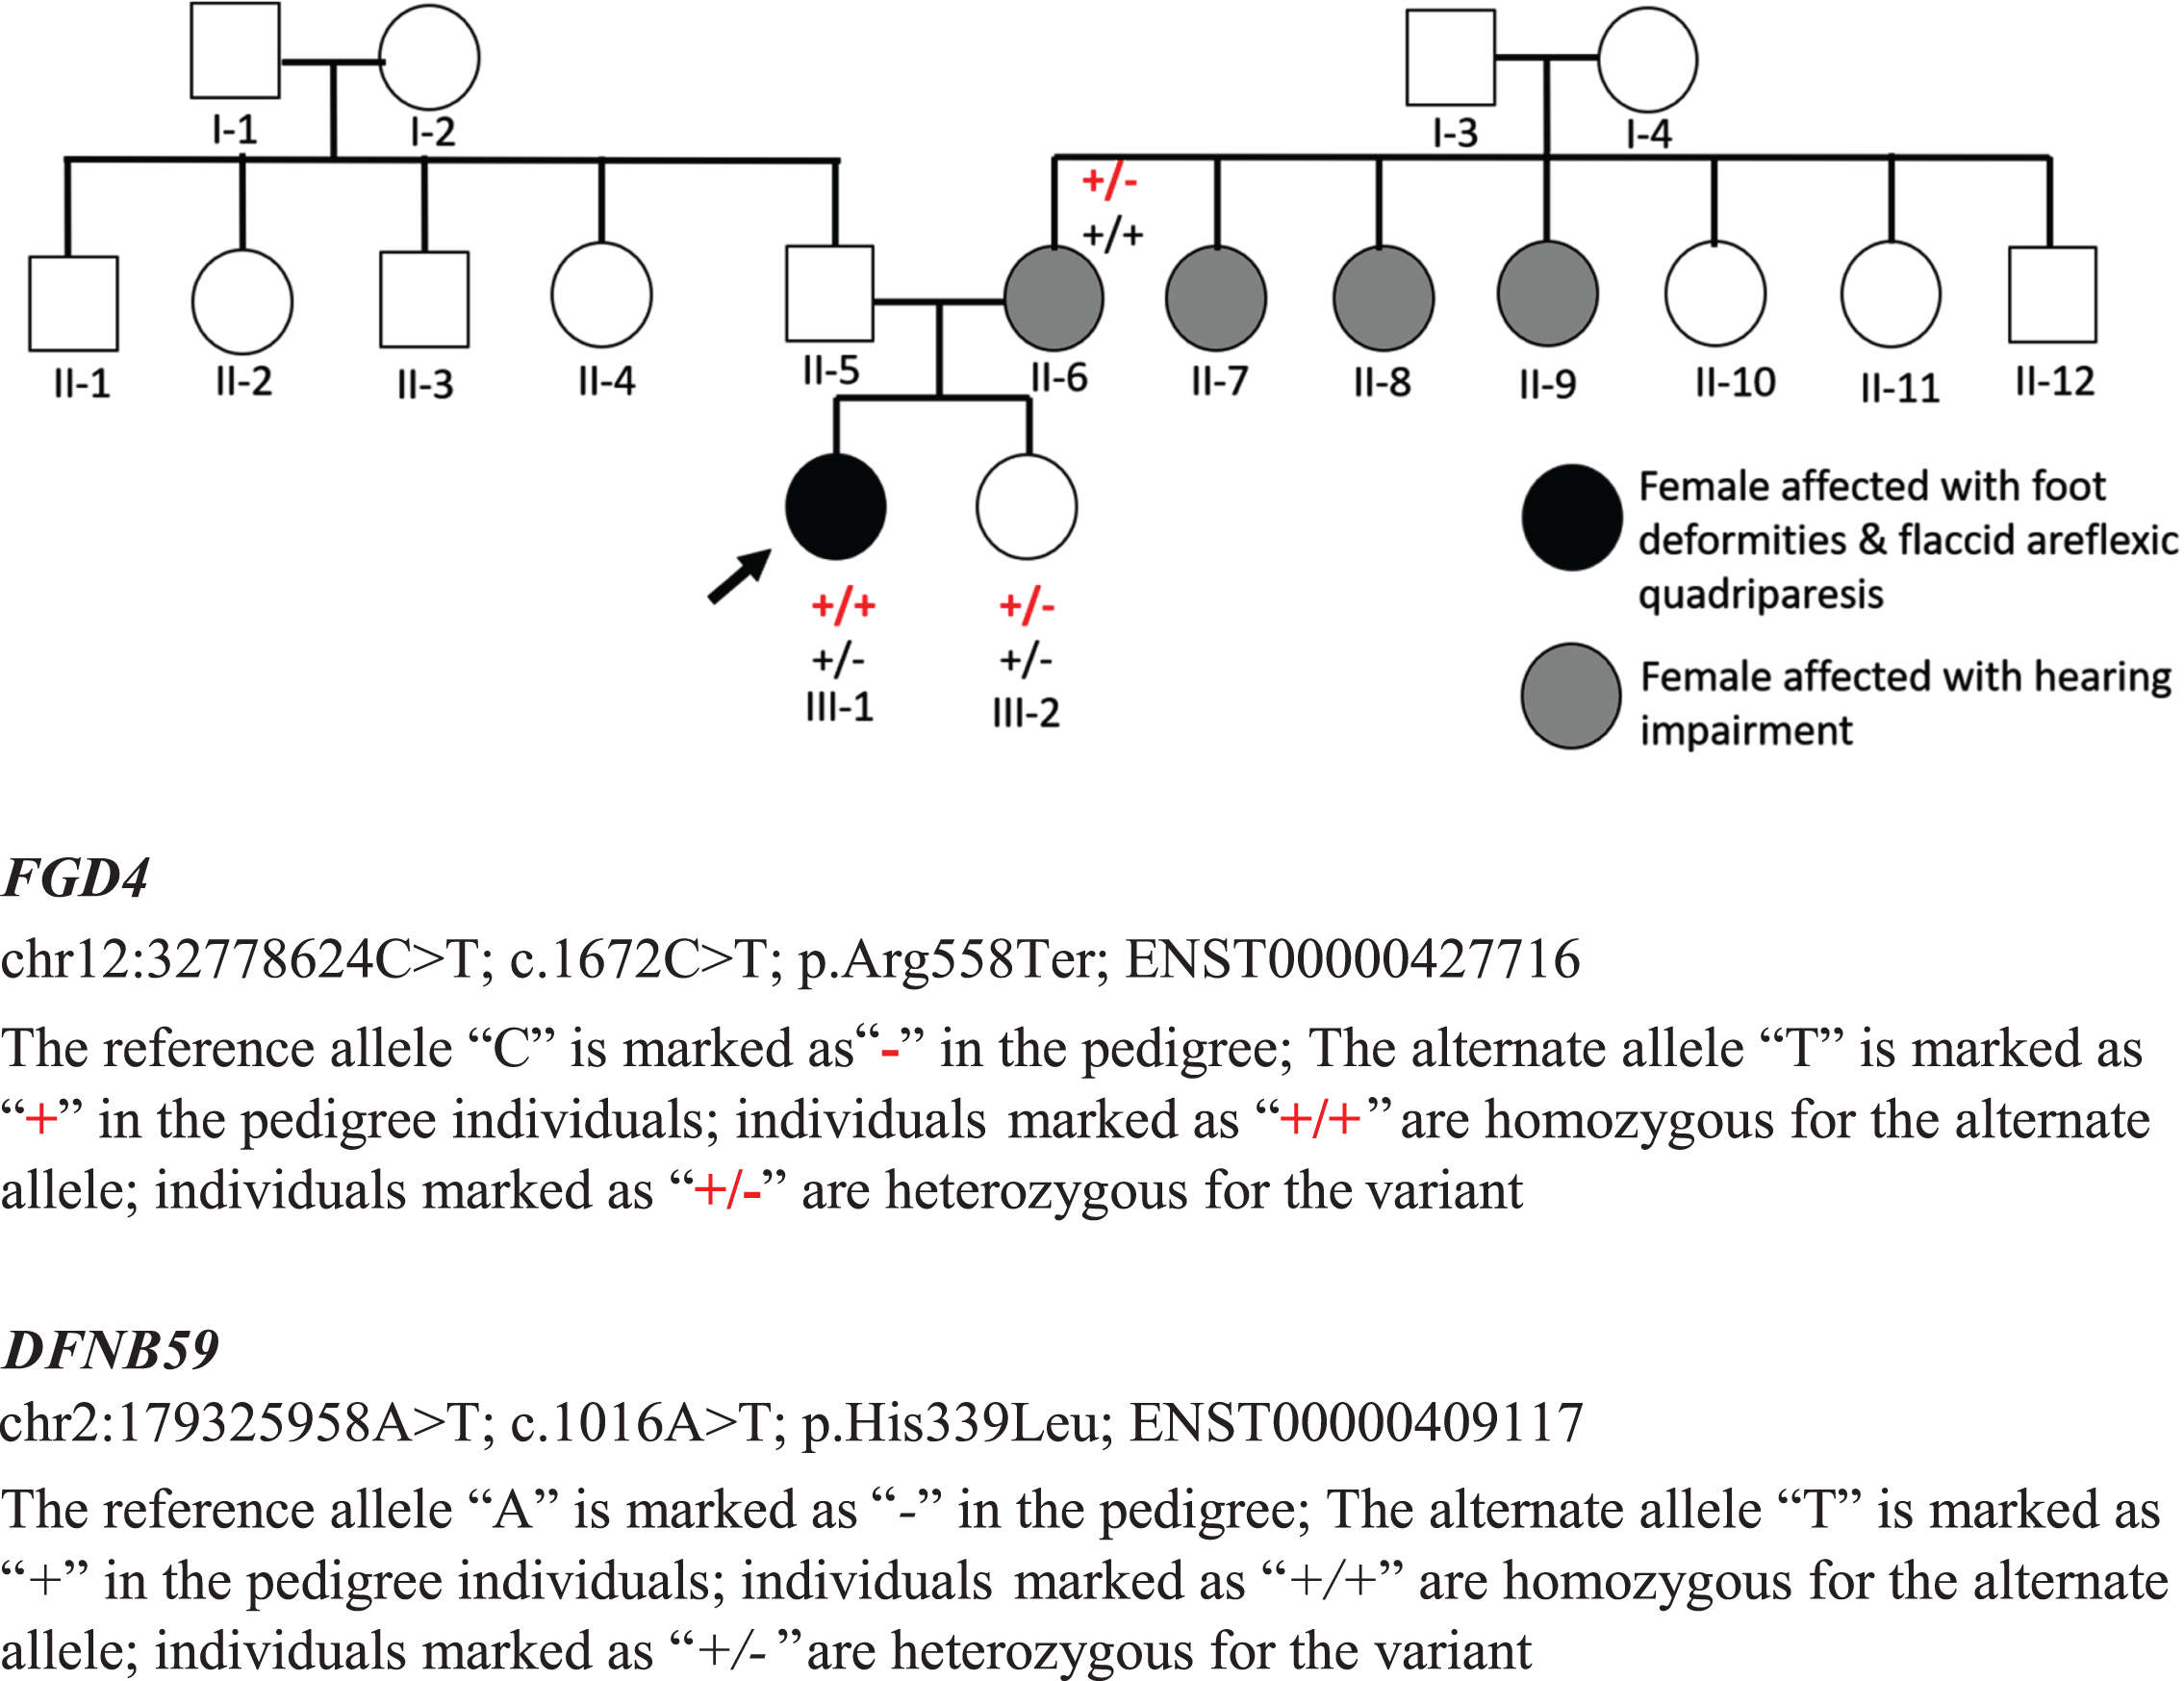 The pedigree of the present proband with the FGD4 gene mutation is illustrated.